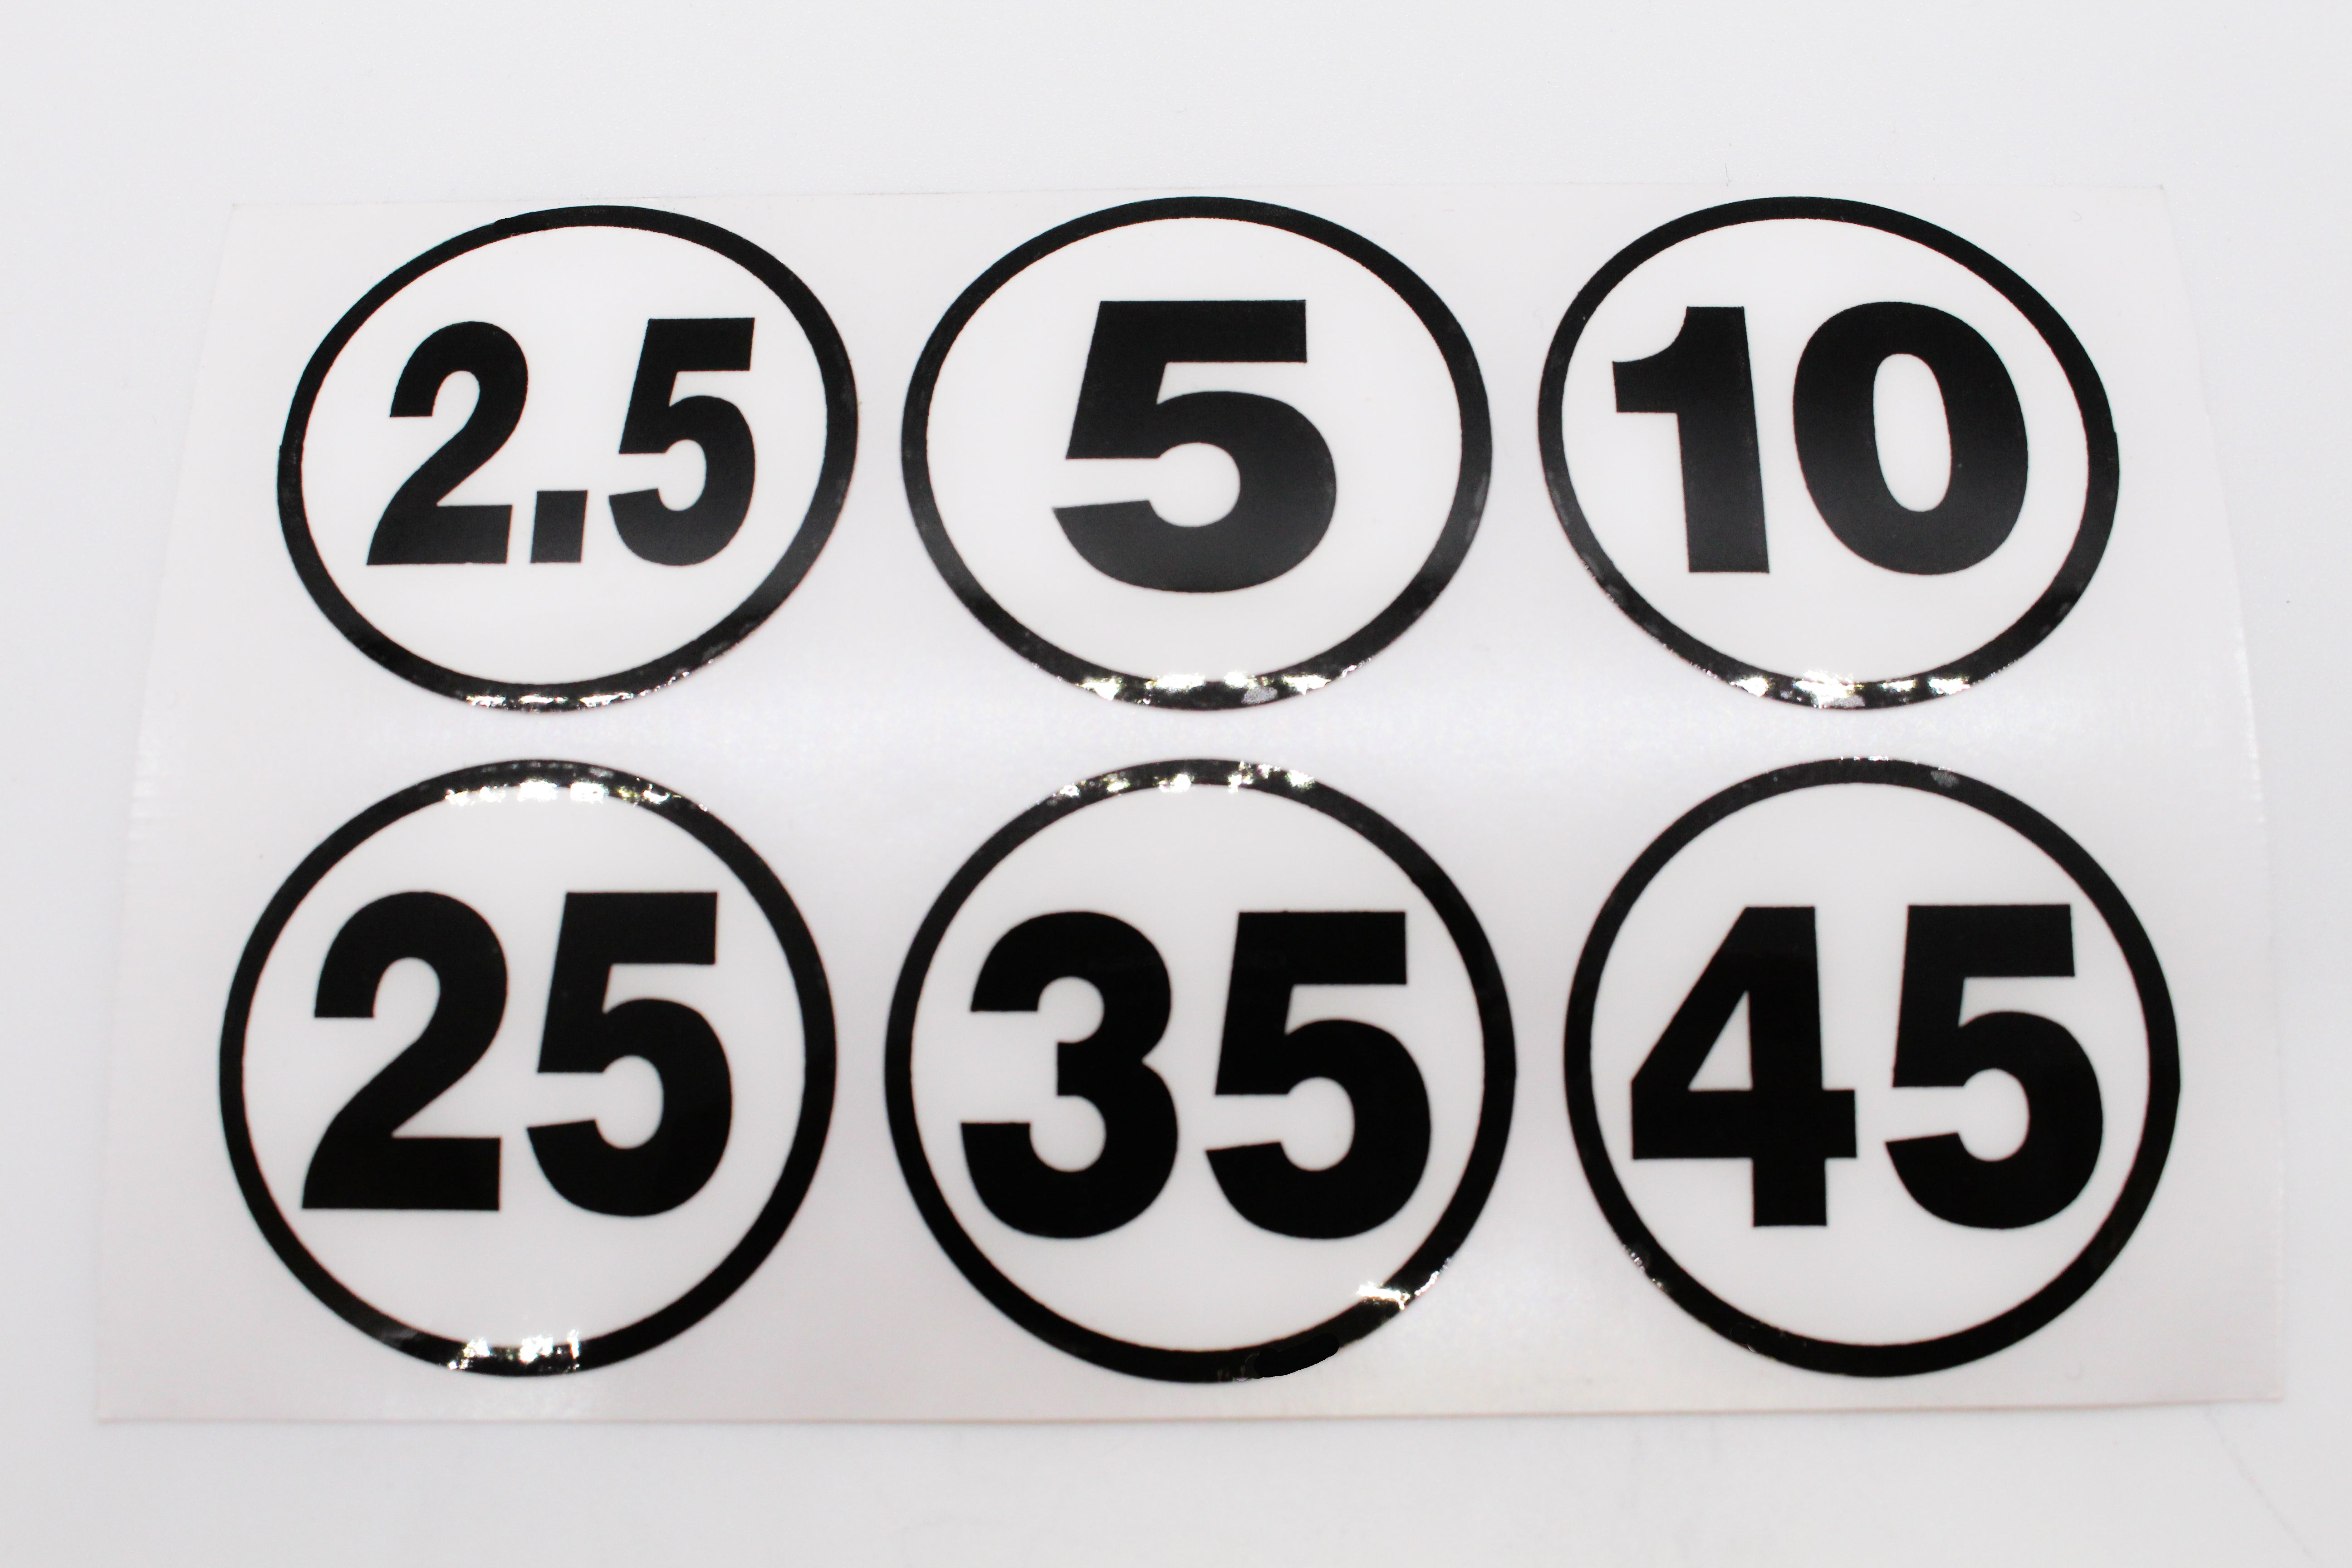 Weight Stack & Dumbbell Number Sticker Set - 10 - 210 Lbs